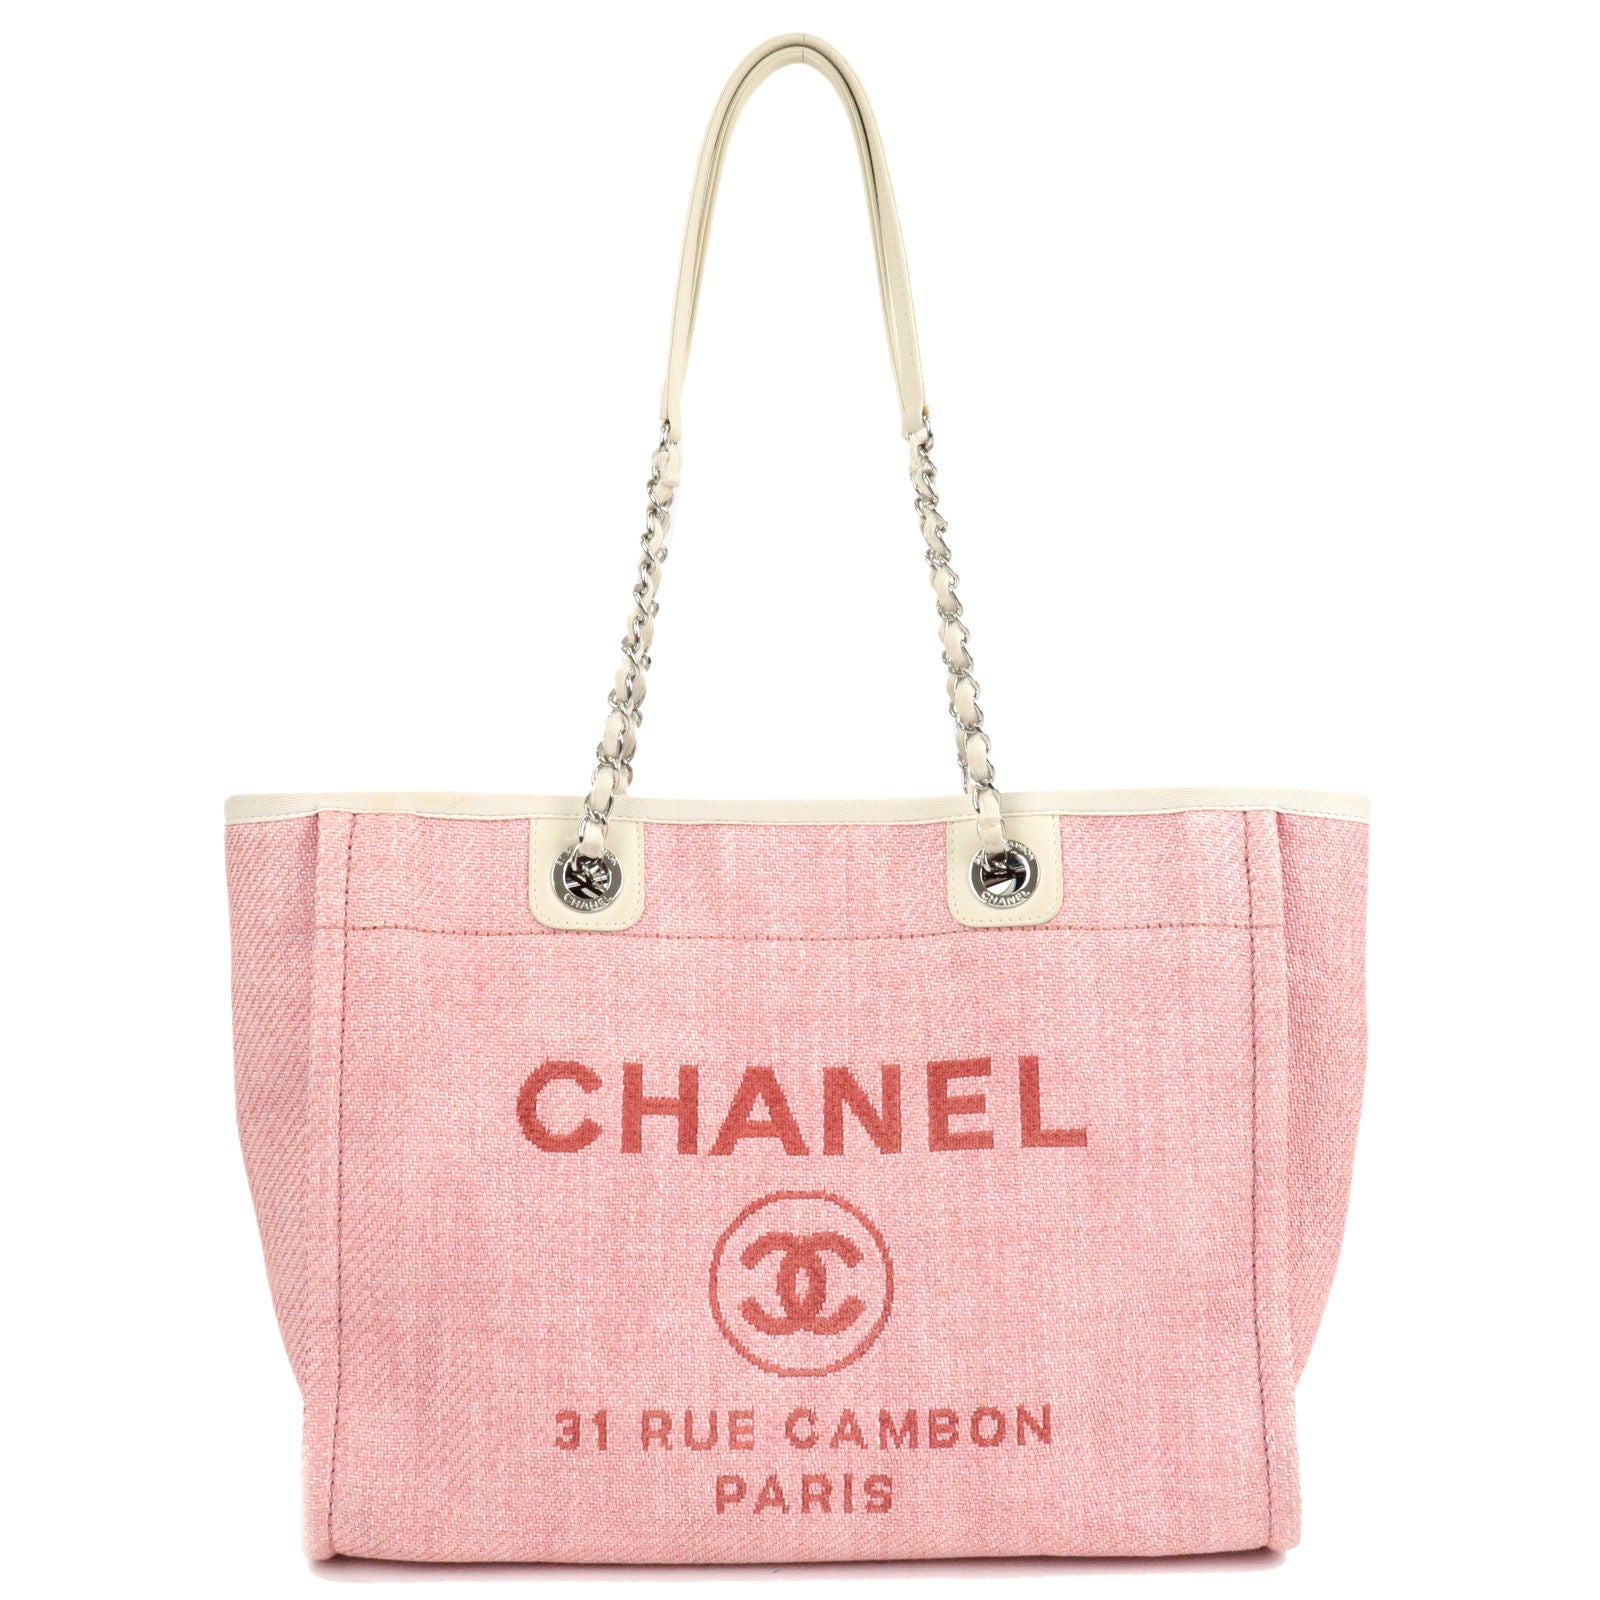 CHANEL-Deauville-MM-Mix-Fiber-Leather-Chain-Tote-Bag-Pink-A67001